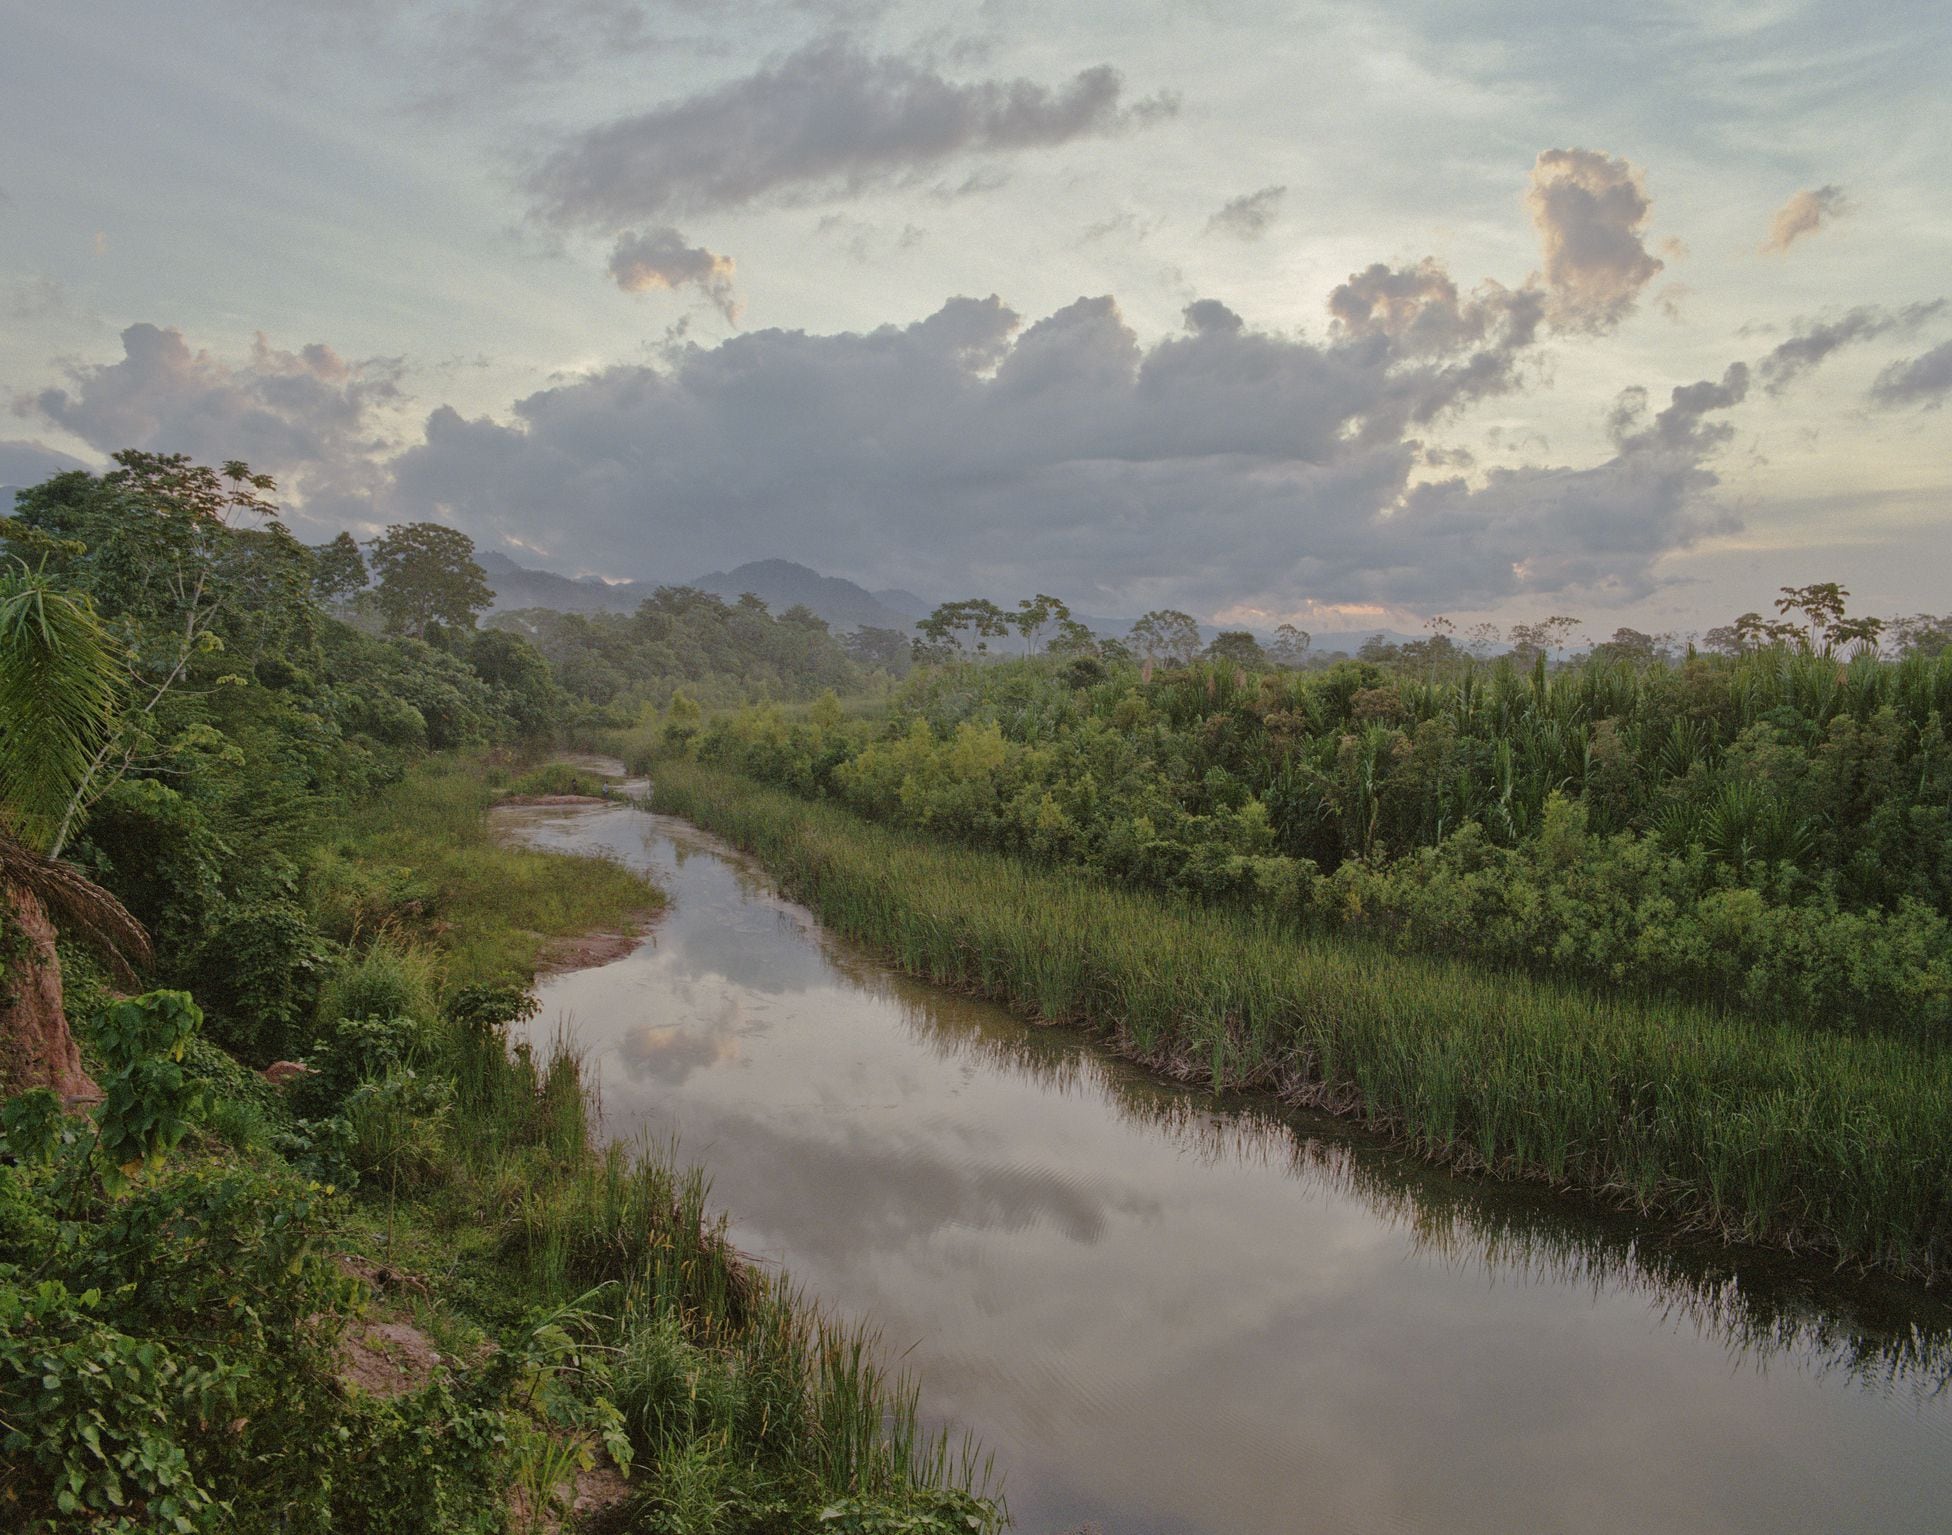 Scientists will simulate climate change in the Amazon to study its effects